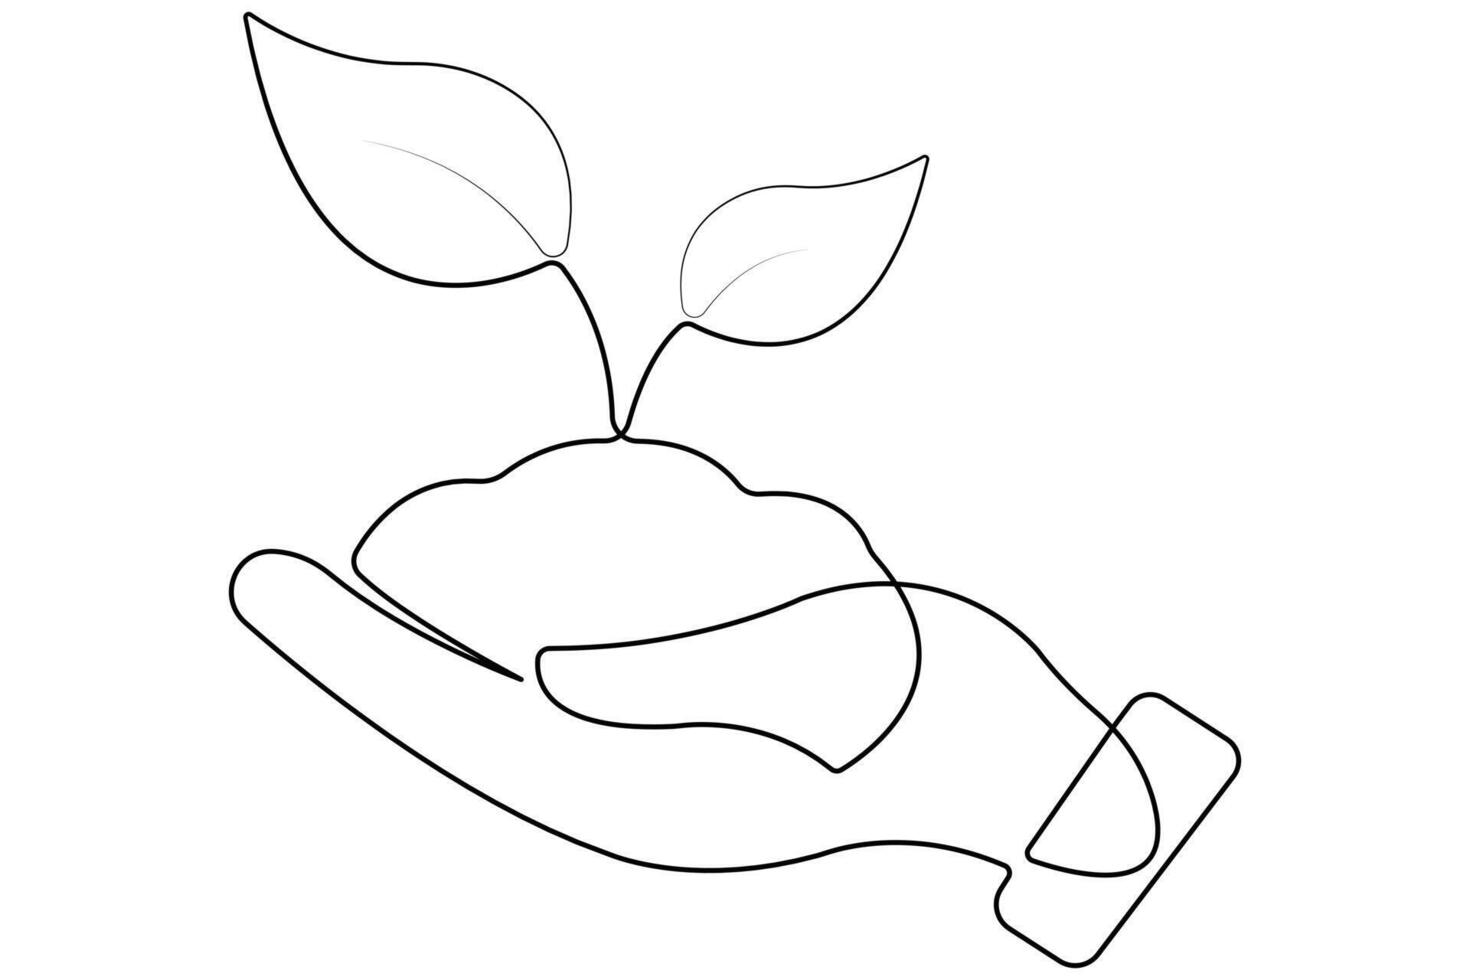 Continuous single line art drawing of plant can be for plants, agriculture, seeds outline vector